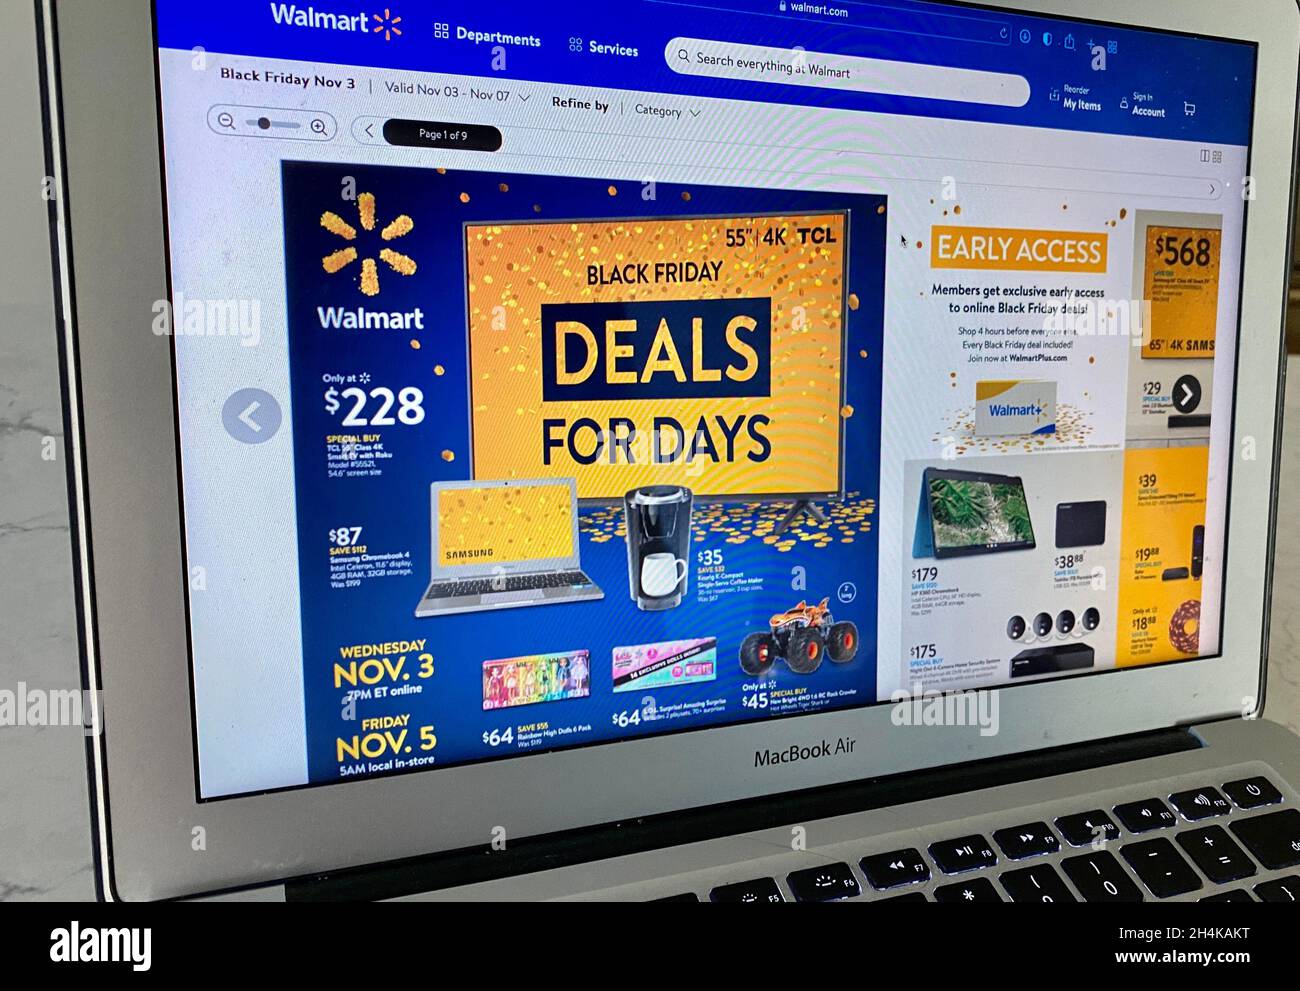 Online shopping for early Black Friday deals at Walmart.com Stock Photo